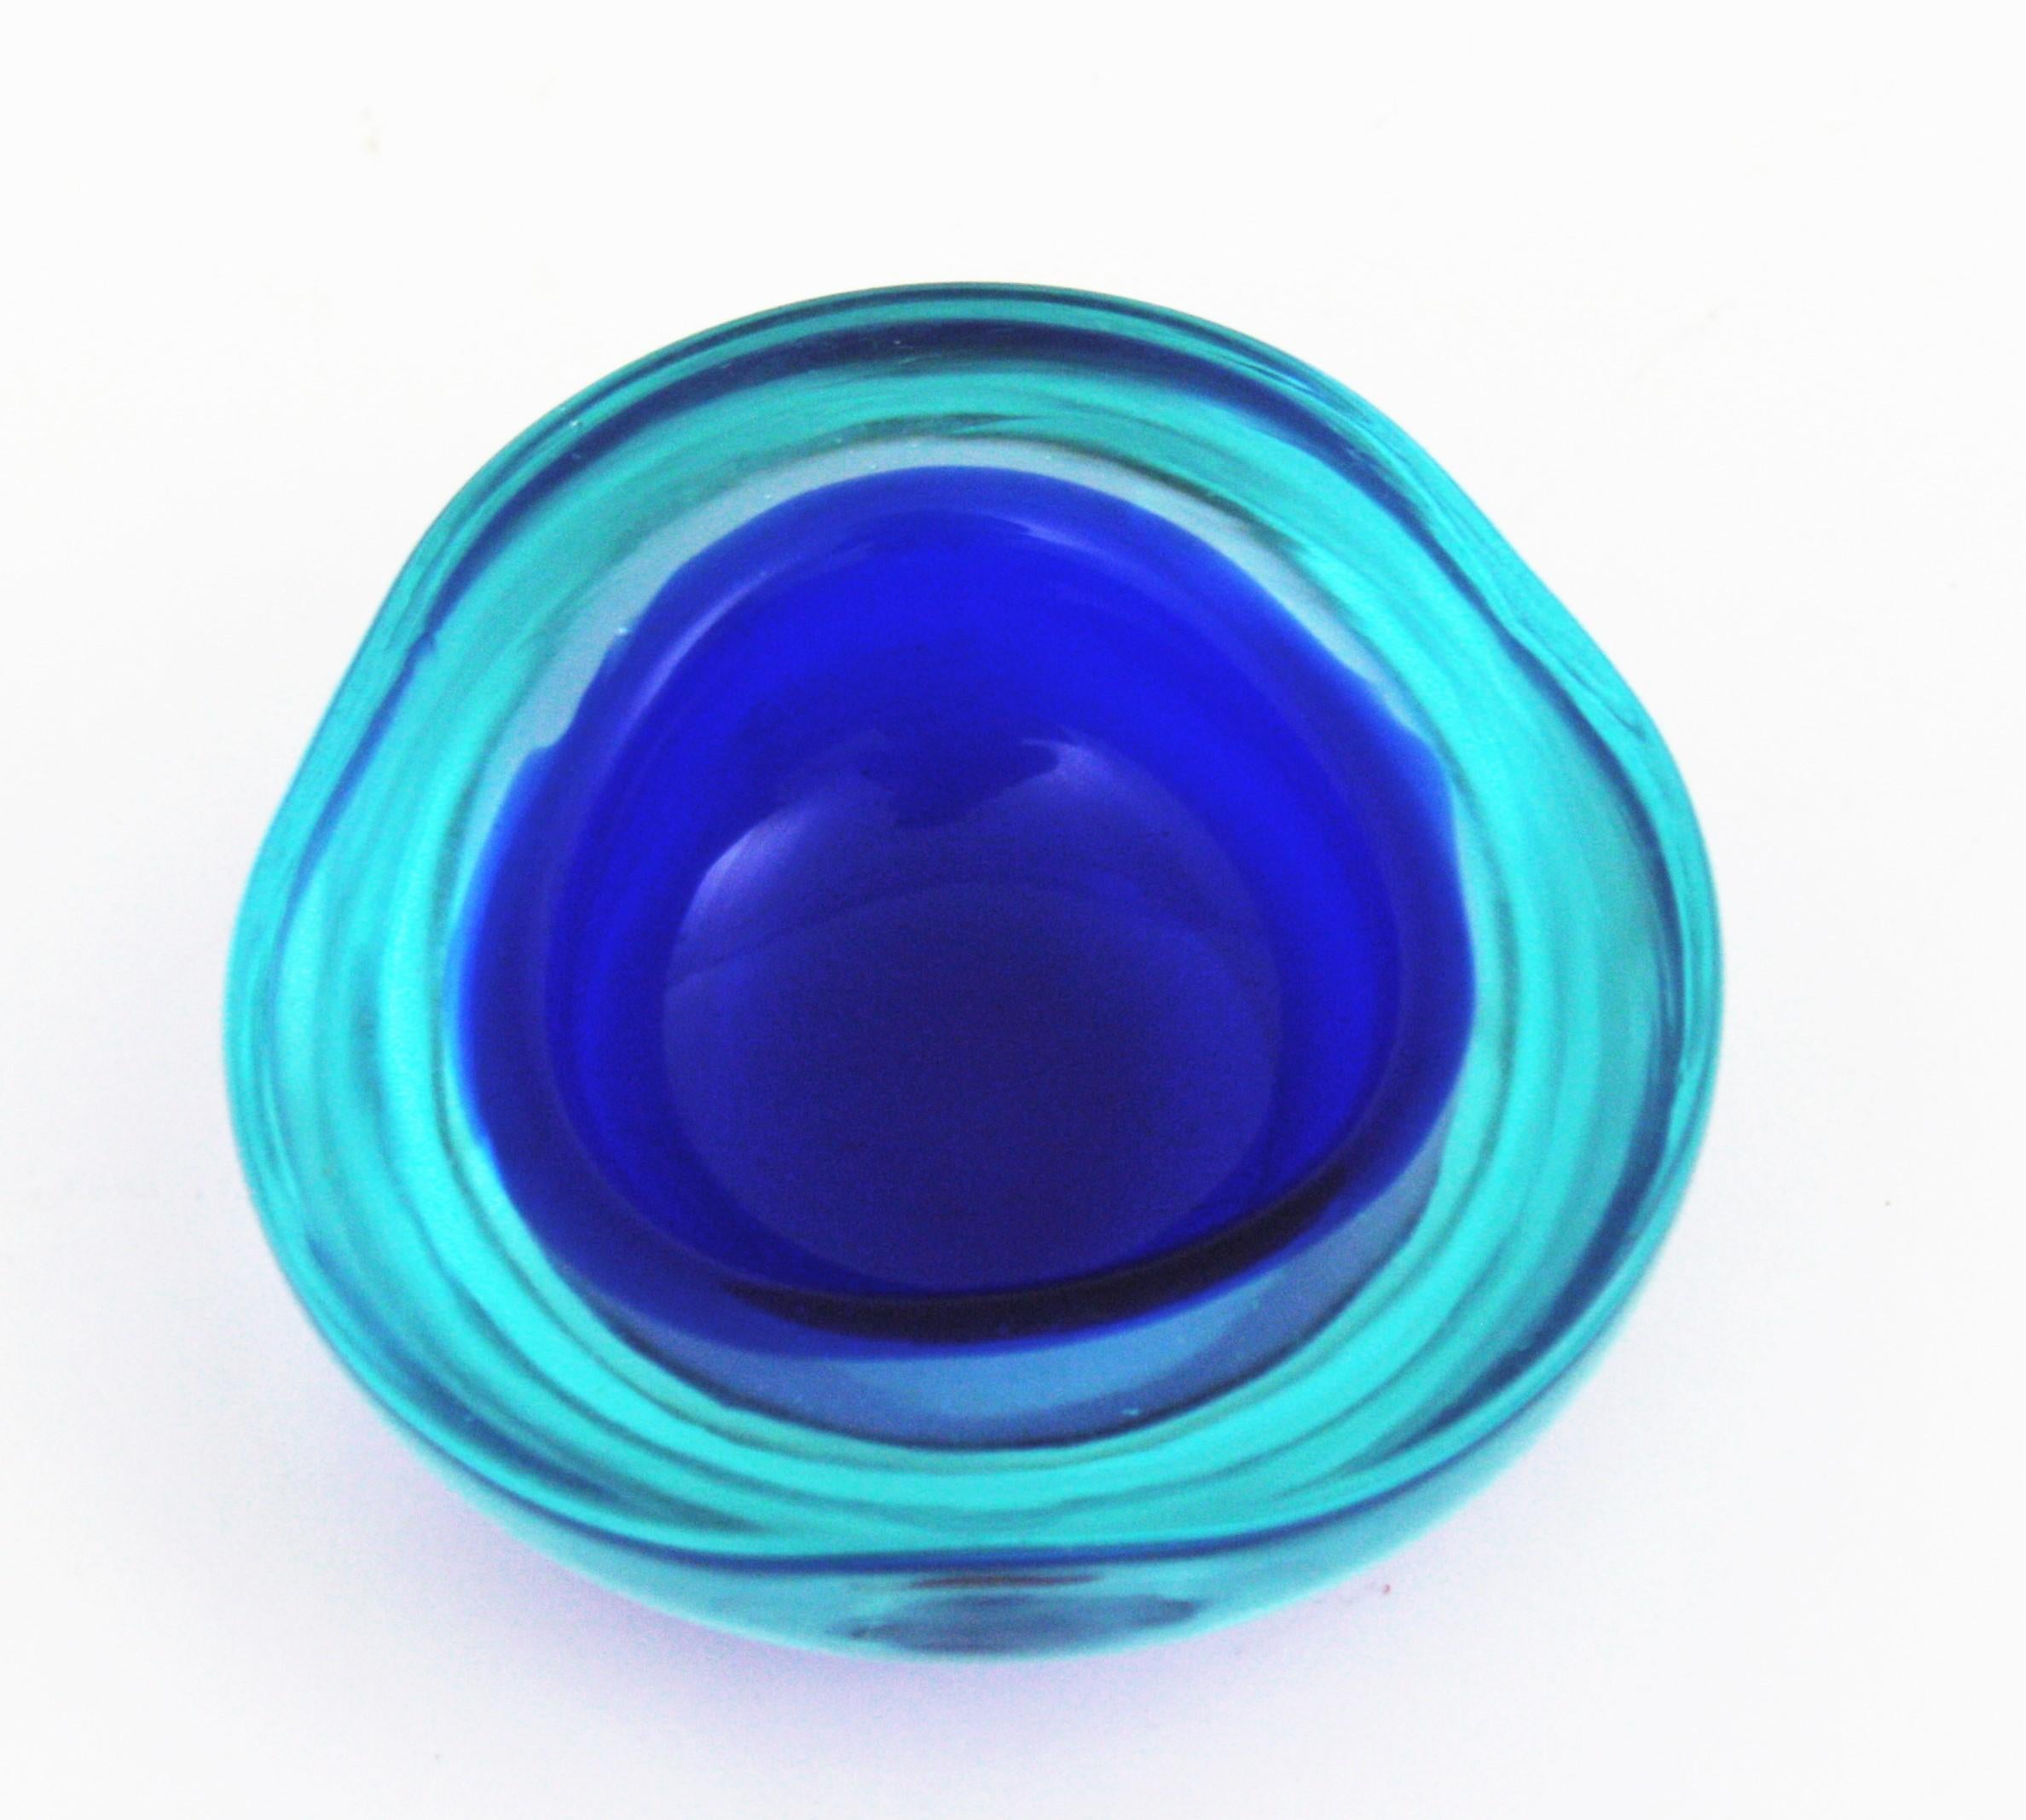 Archimede Seguso Murano Small Sommerso Blue Glass Geode Bowl, 1960s For Sale 8